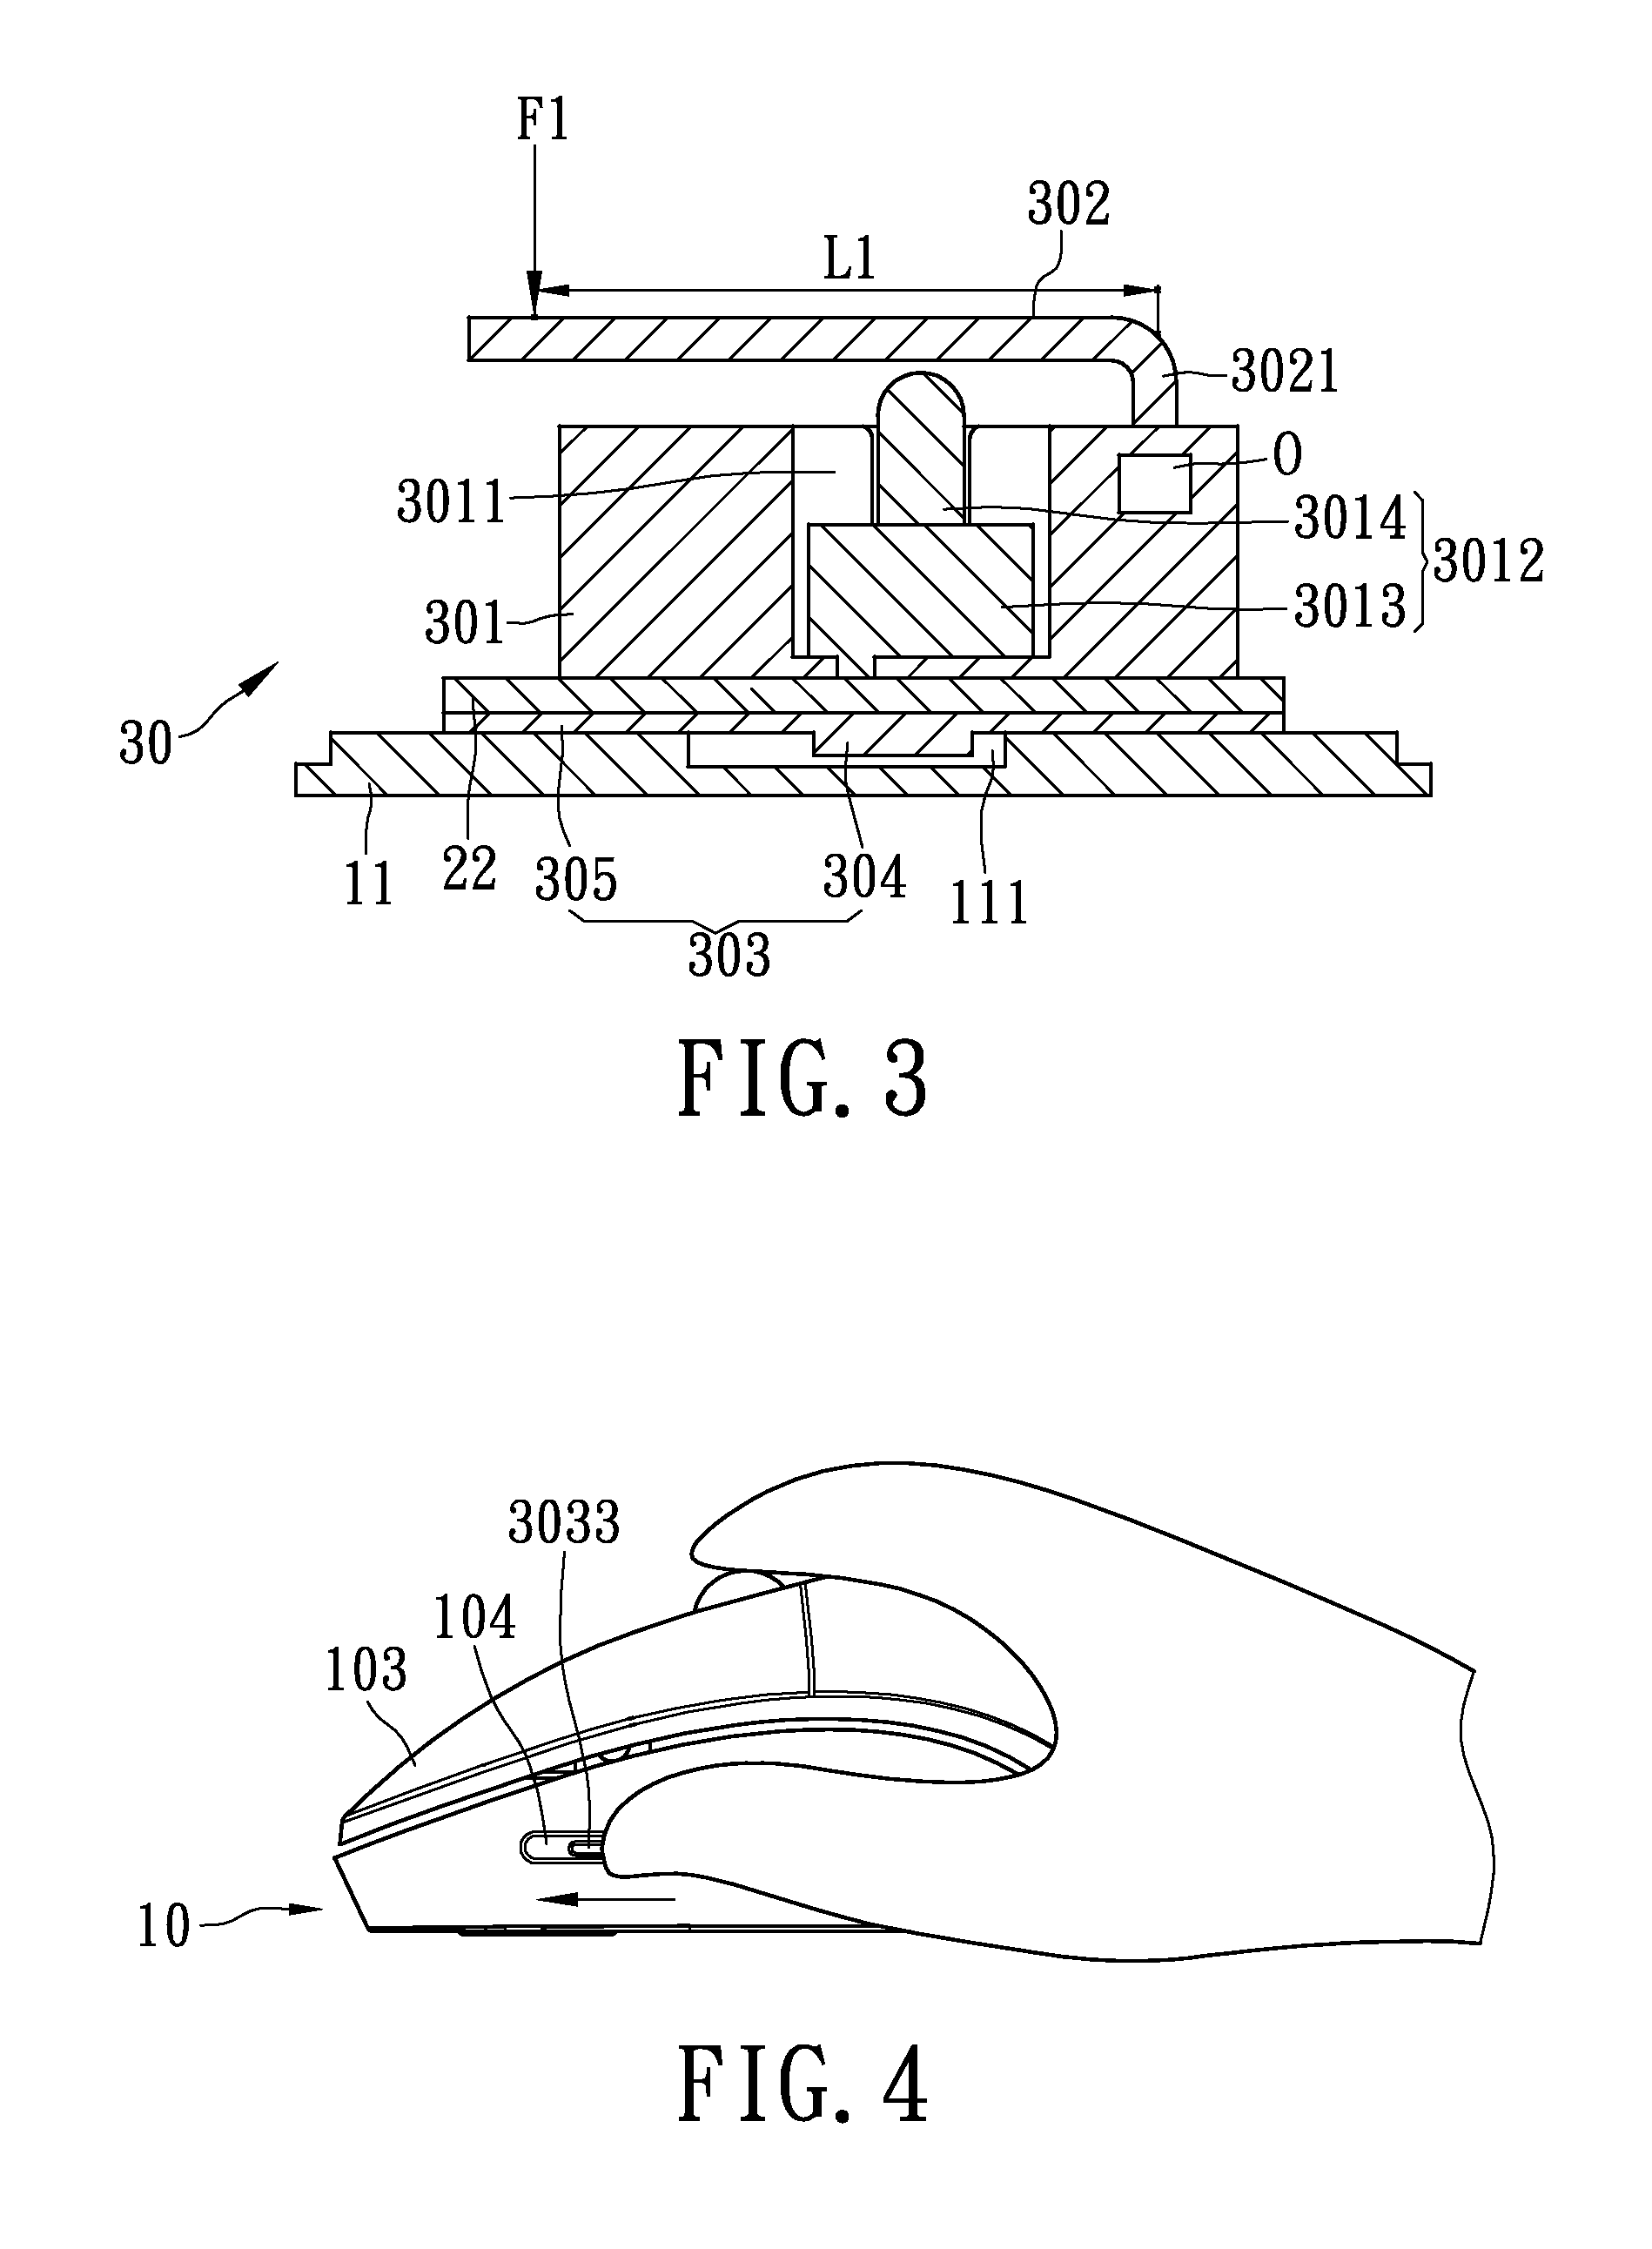 Mouse structure with adjustable clicking force function